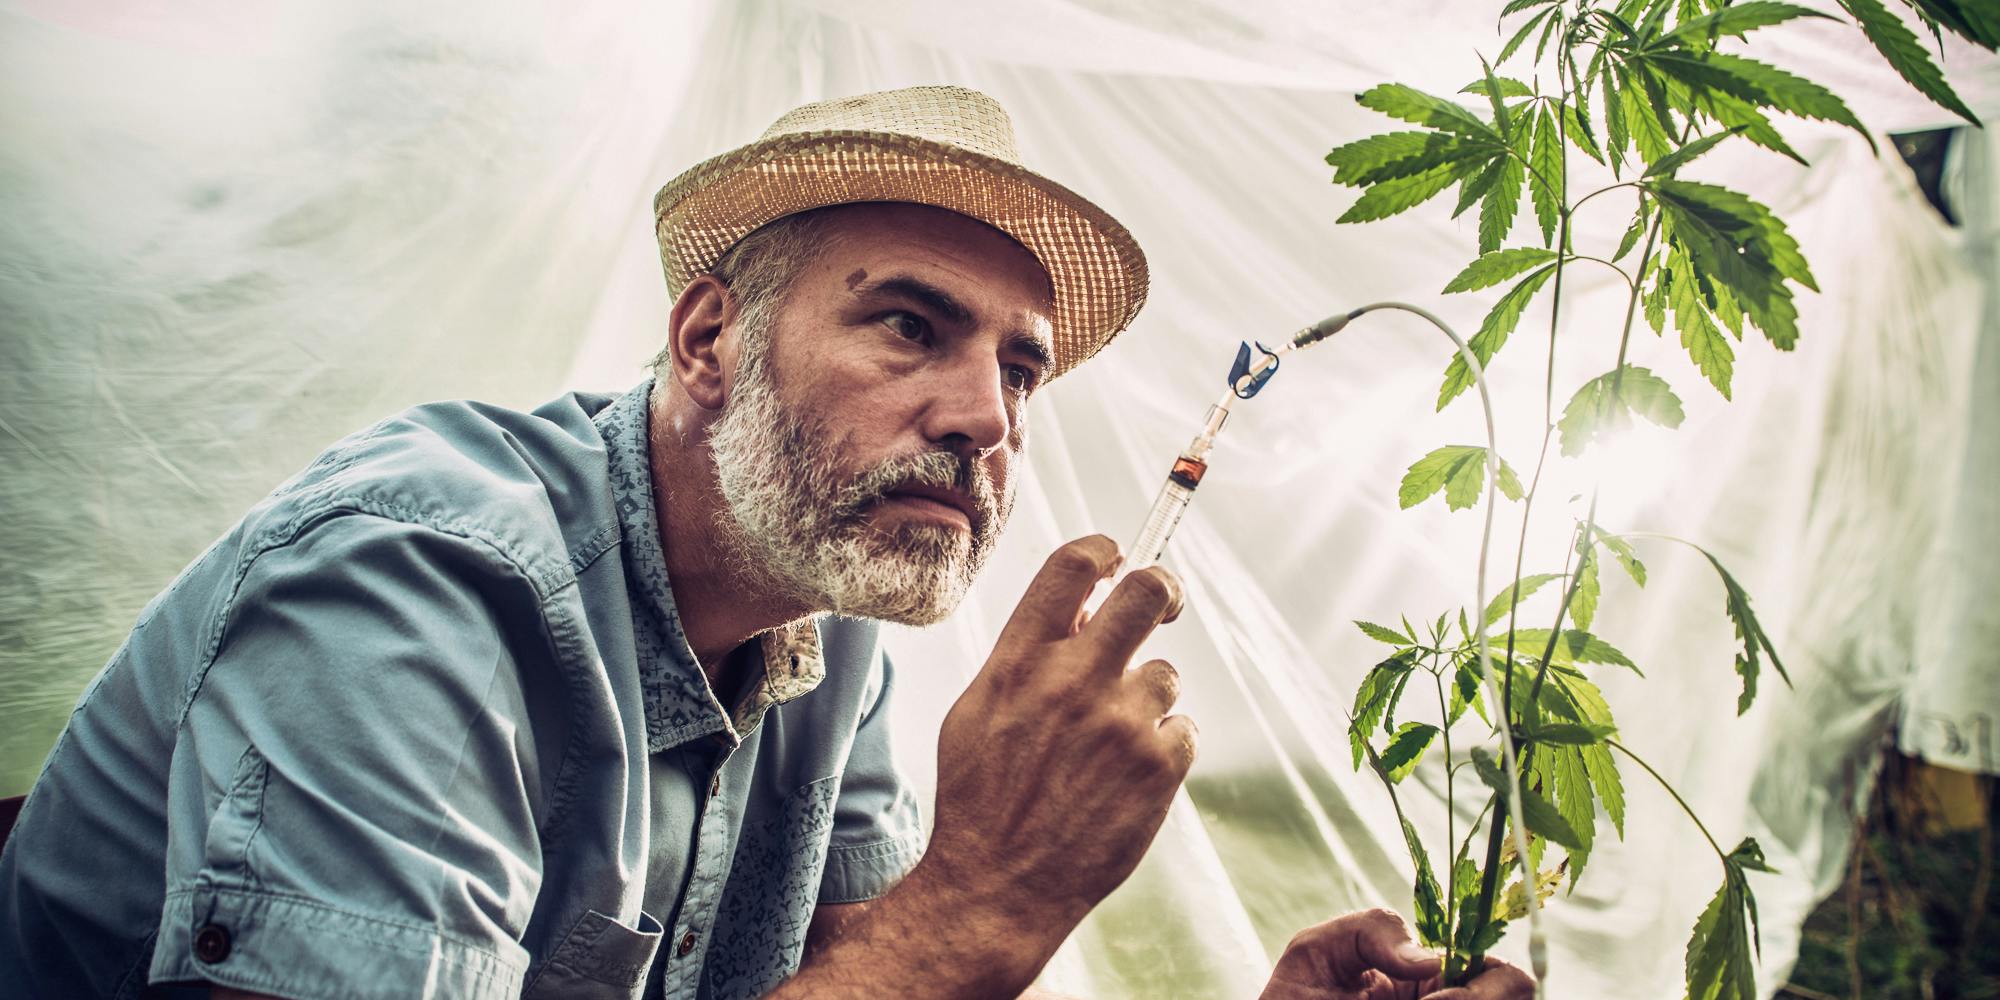 Portrait of Cannabis farmer apply chemical modification to plant. The question many are asking is are weed strain names legit?